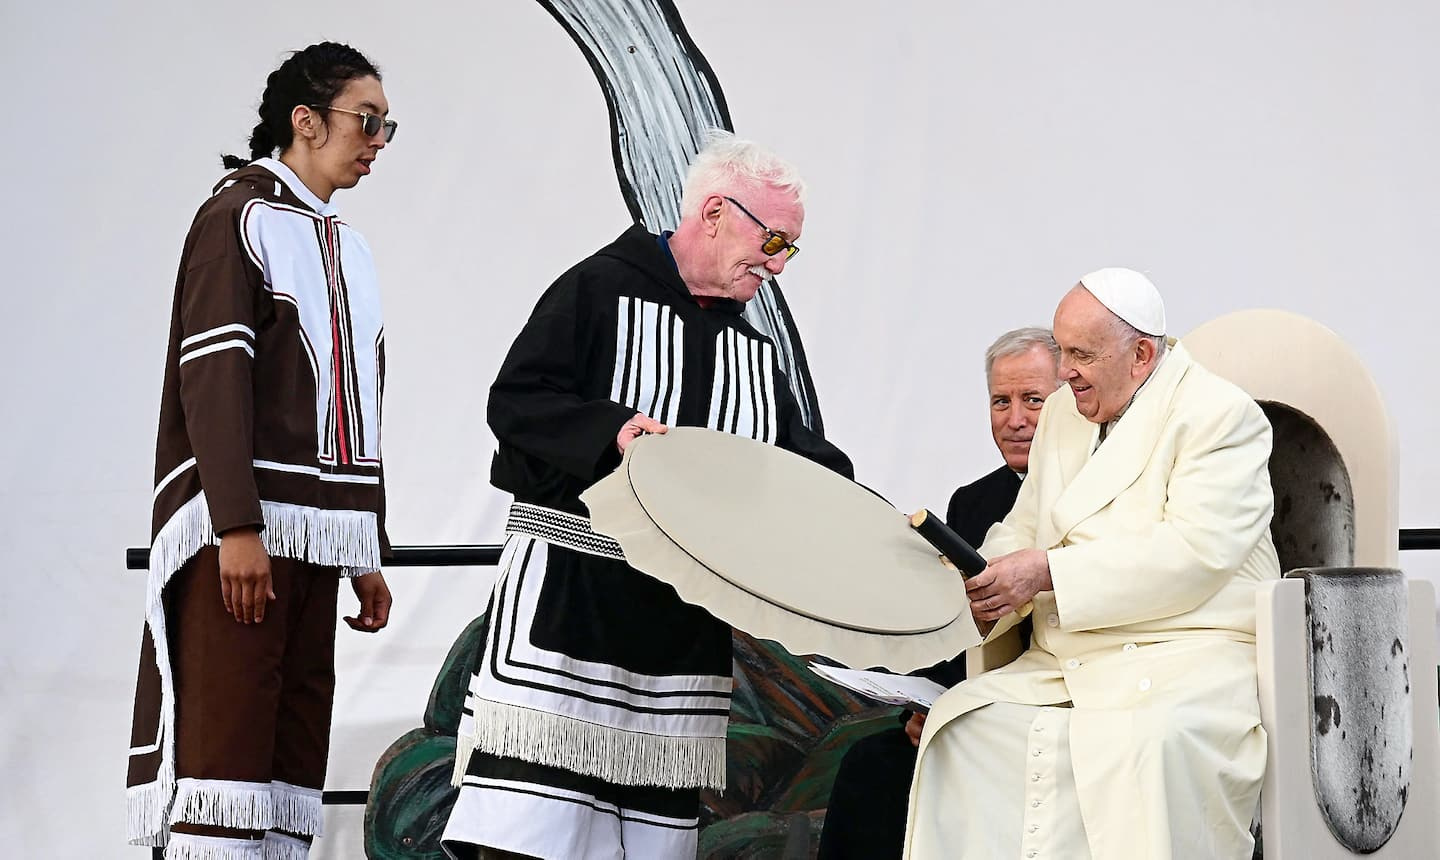 The pope says he received as a "slap" the testimonies of indigenous Canadians